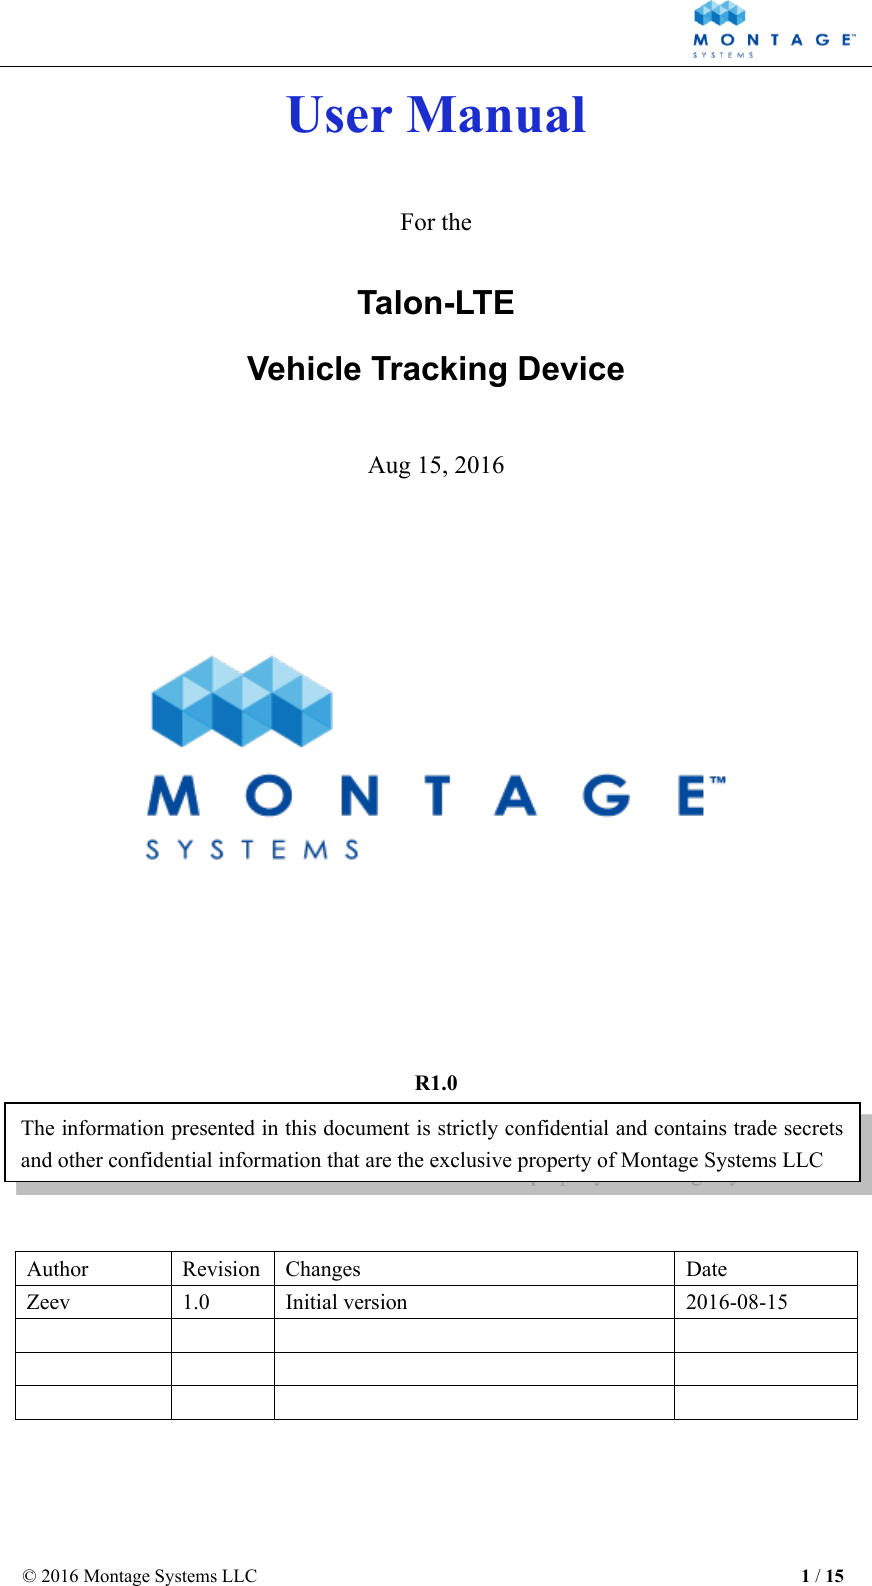  © 2016 Montage Systems LLC                                                          1 / 15  User Manual  For the Talon-LTE Vehicle Tracking Device  Aug 15, 2016         R1.0    Author Revision Changes Date Zeev 1.0 Initial version 2016-08-15             The information presented in this document is strictly confidential and contains trade secrets and other confidential information that are the exclusive property of Montage Systems LLC 